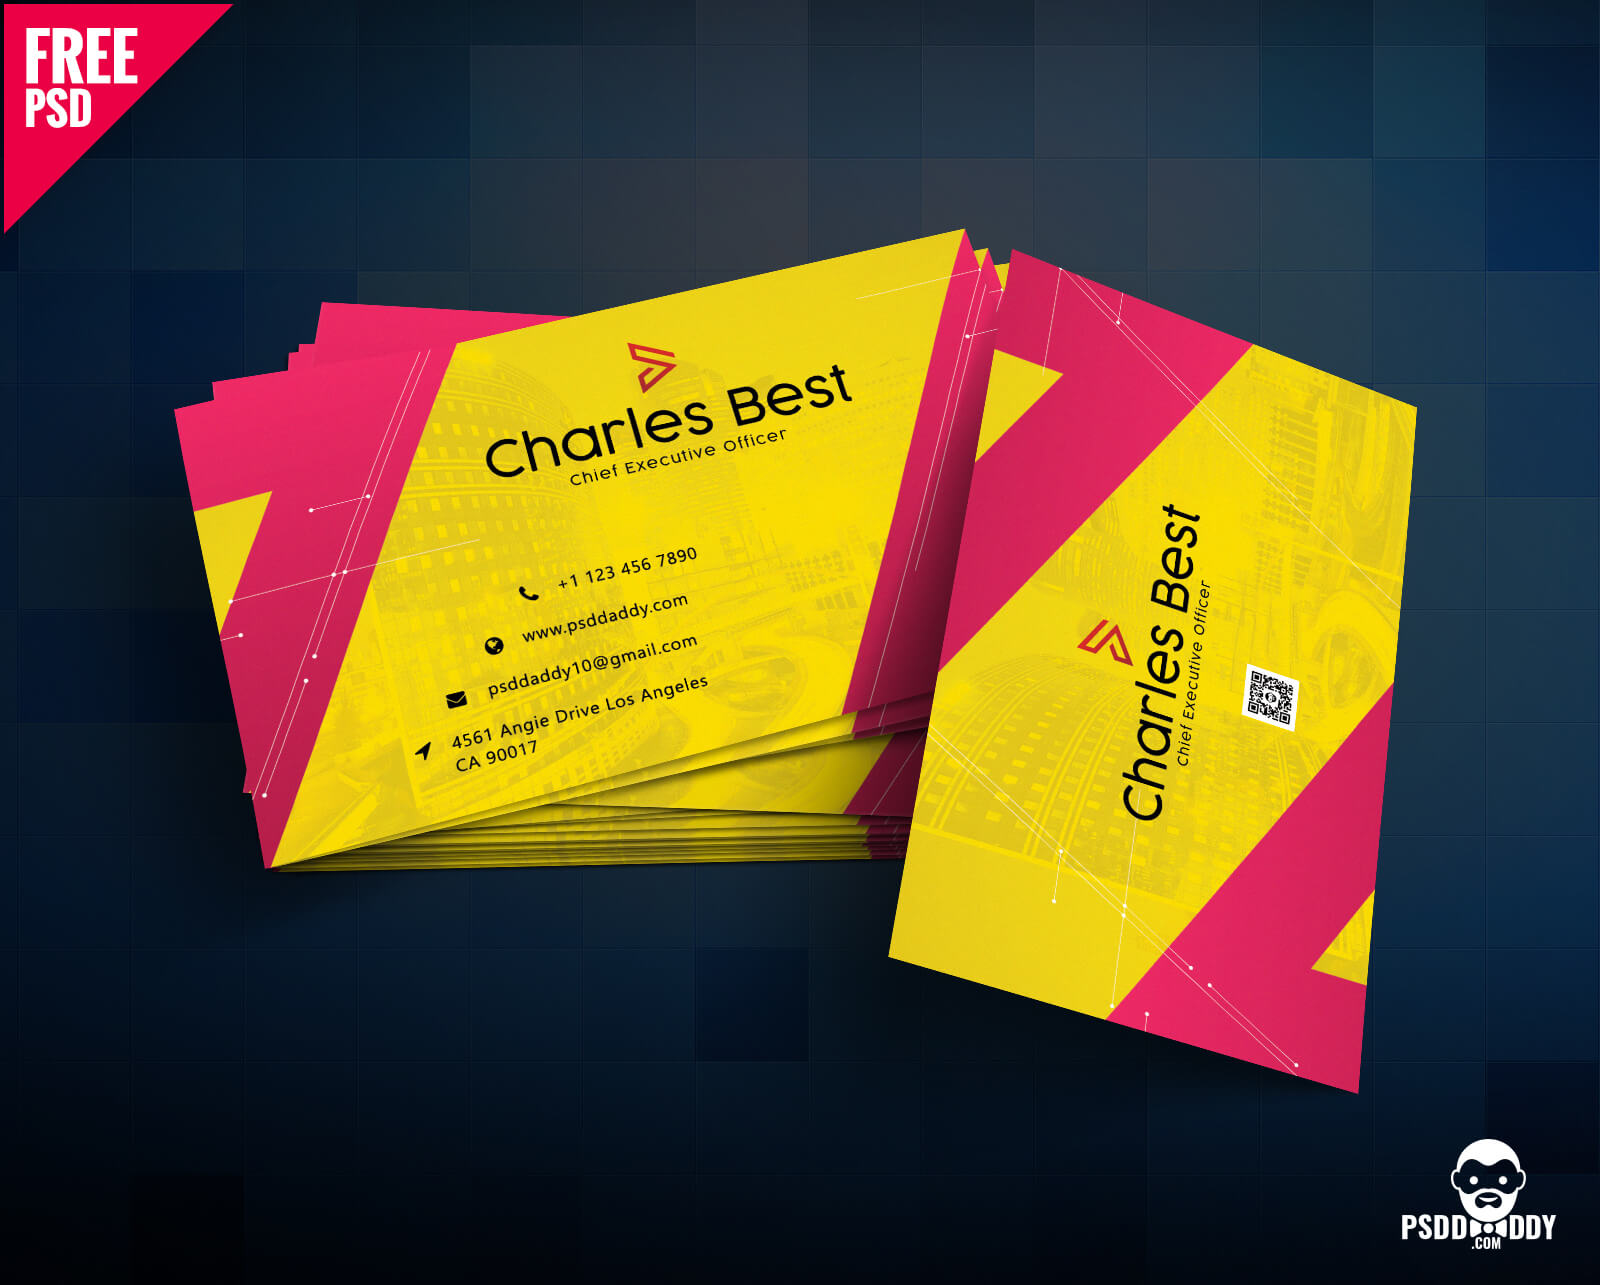 Download] Creative Business Card Free Psd | Psddaddy In Photoshop Business Card Template With Bleed